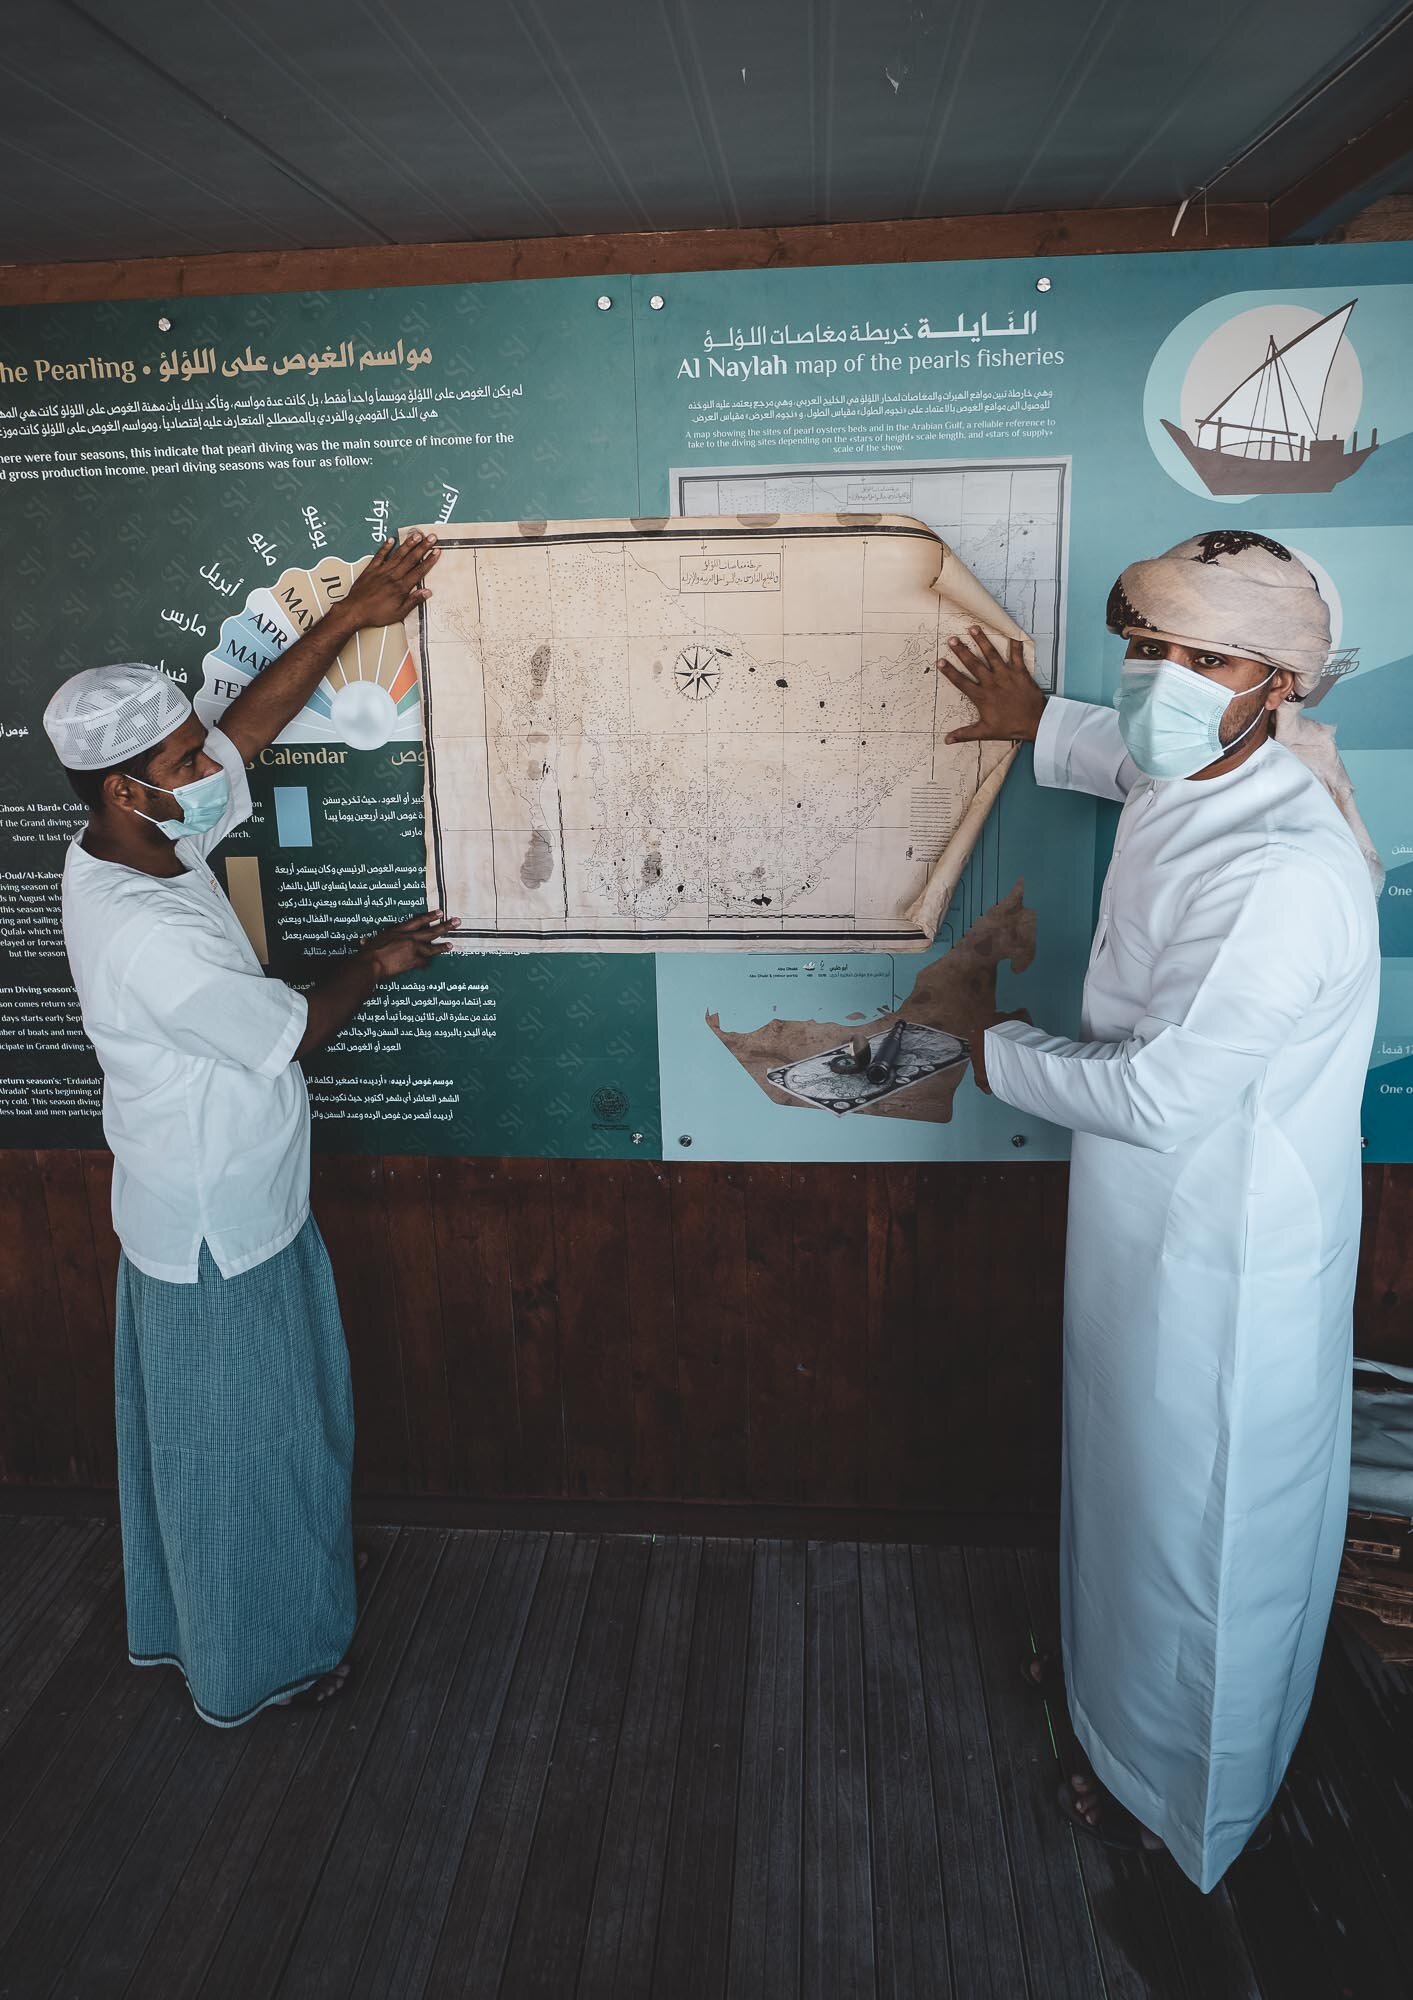  The team takes time to explain the history and process of traditional Pearl farming in the UAE. 